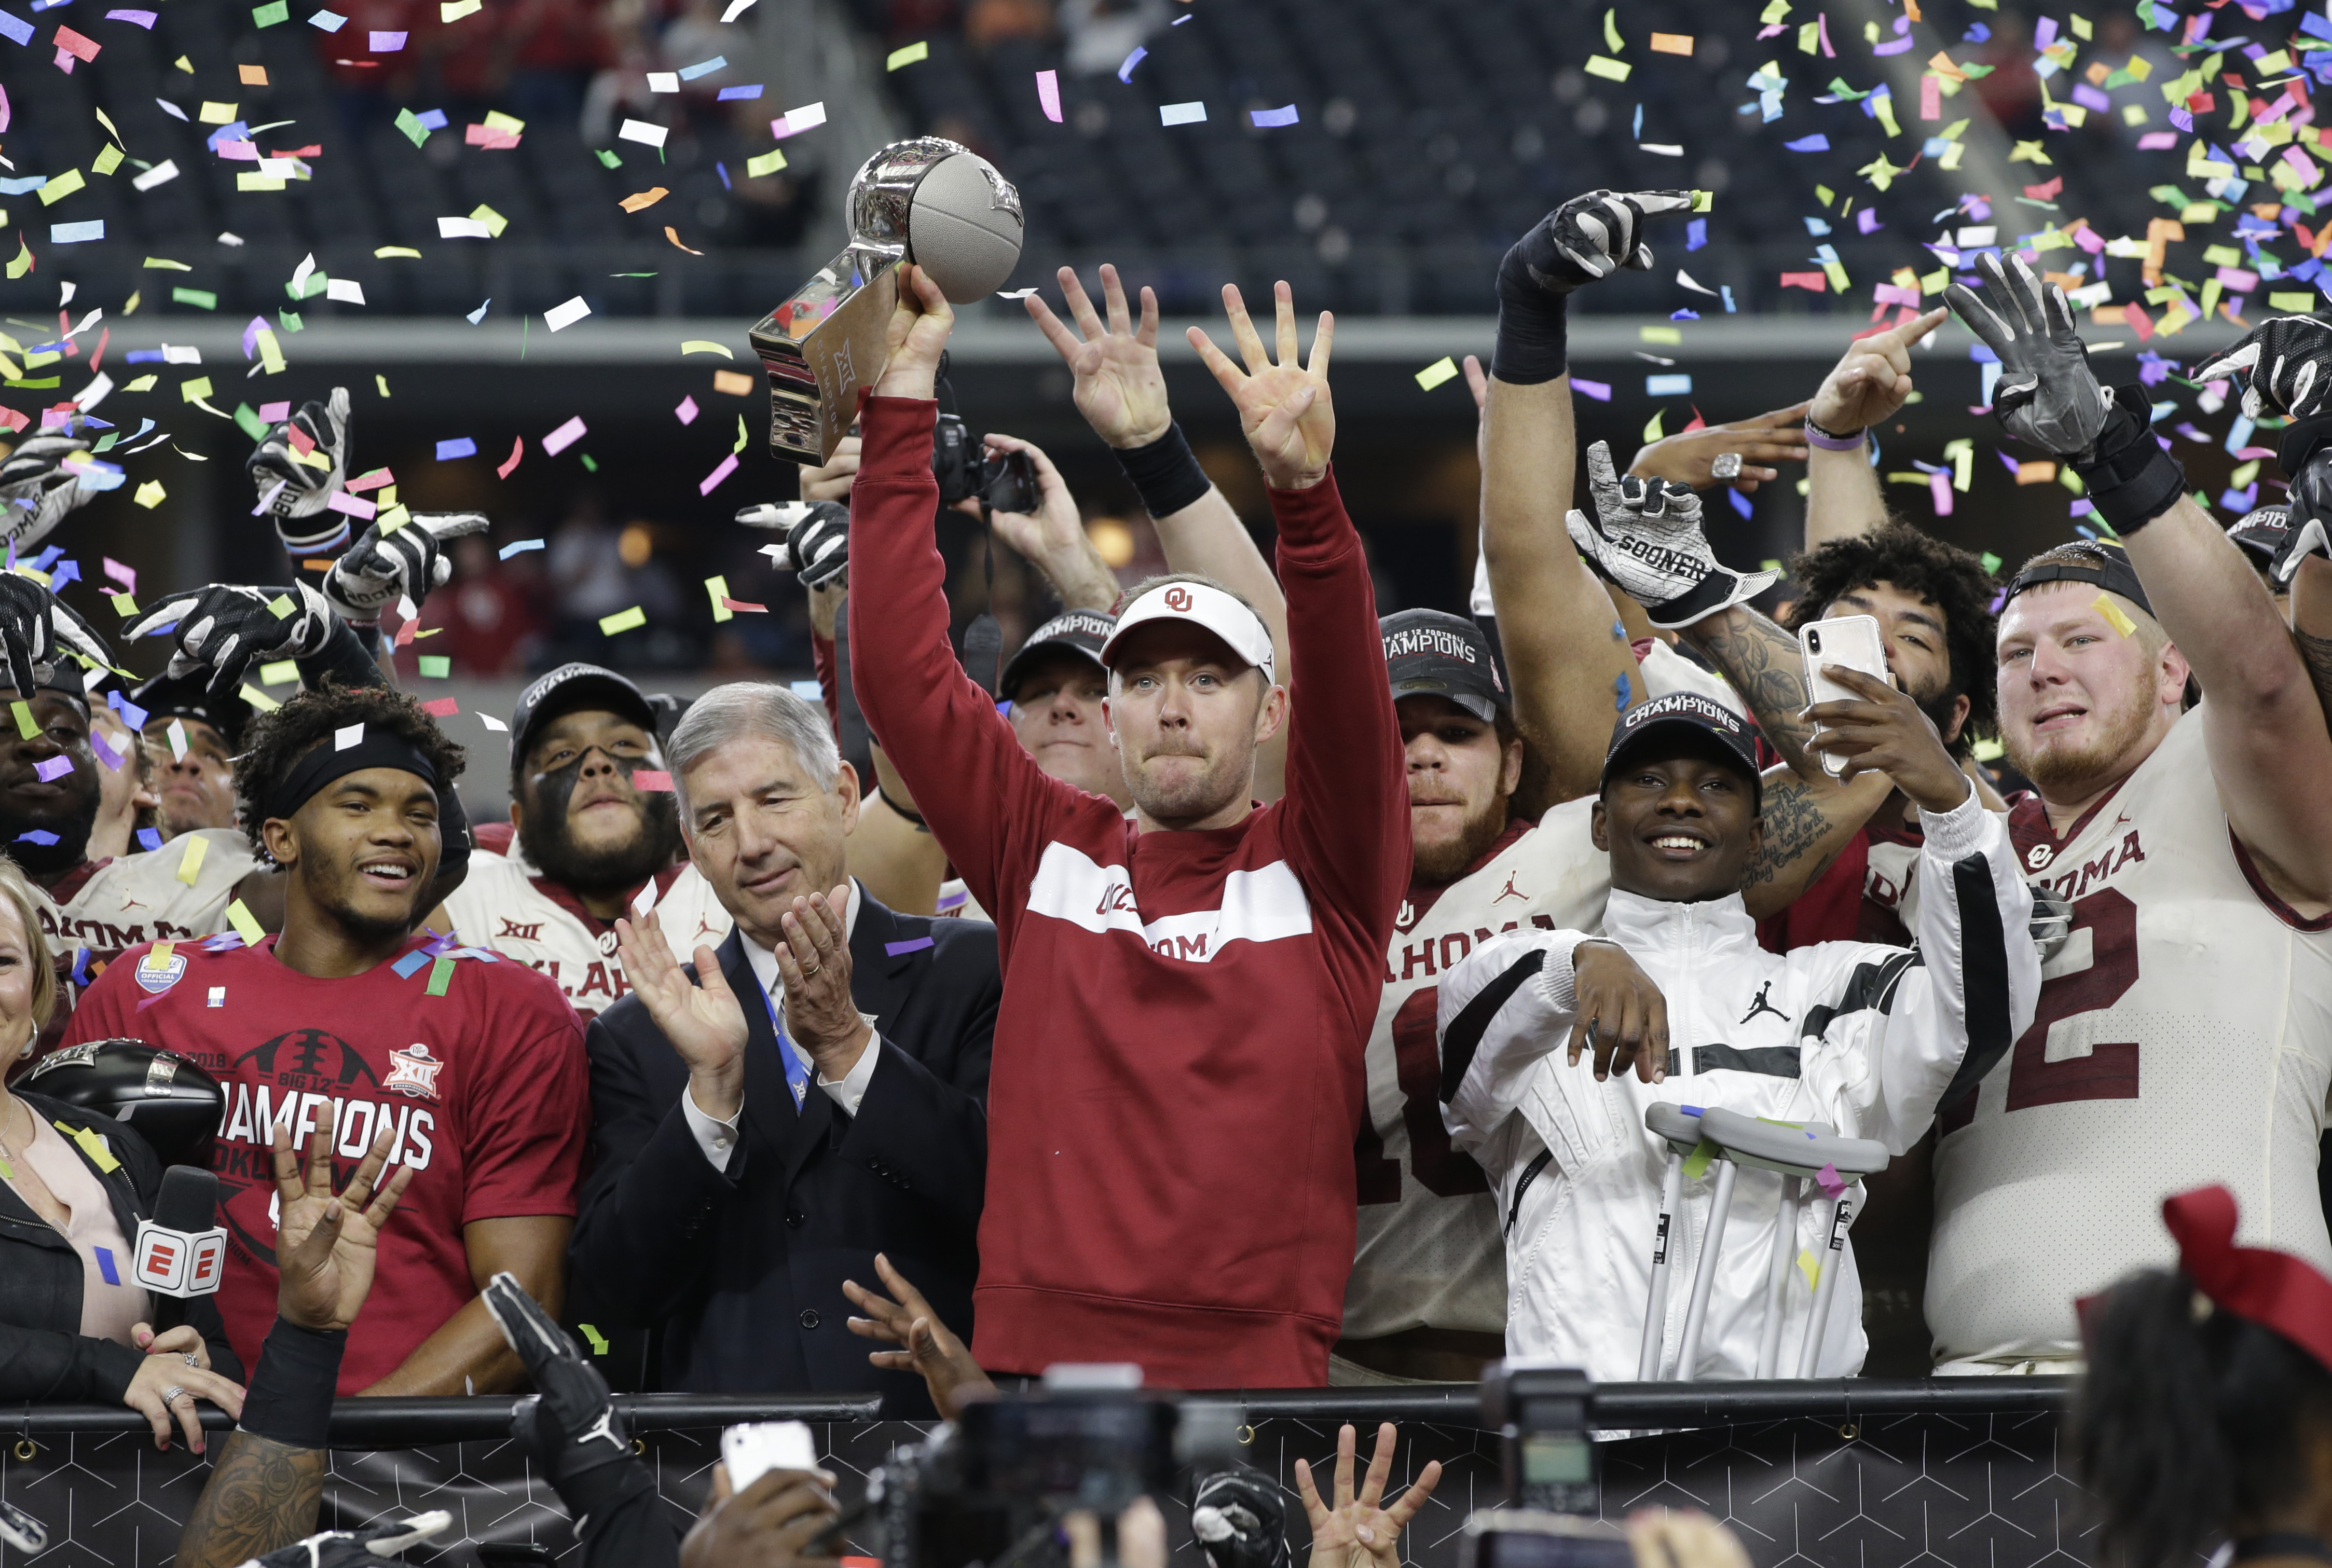 HIGHLIGHTS No. 5 Oklahoma wins 4th straight Big 12 title with 3927